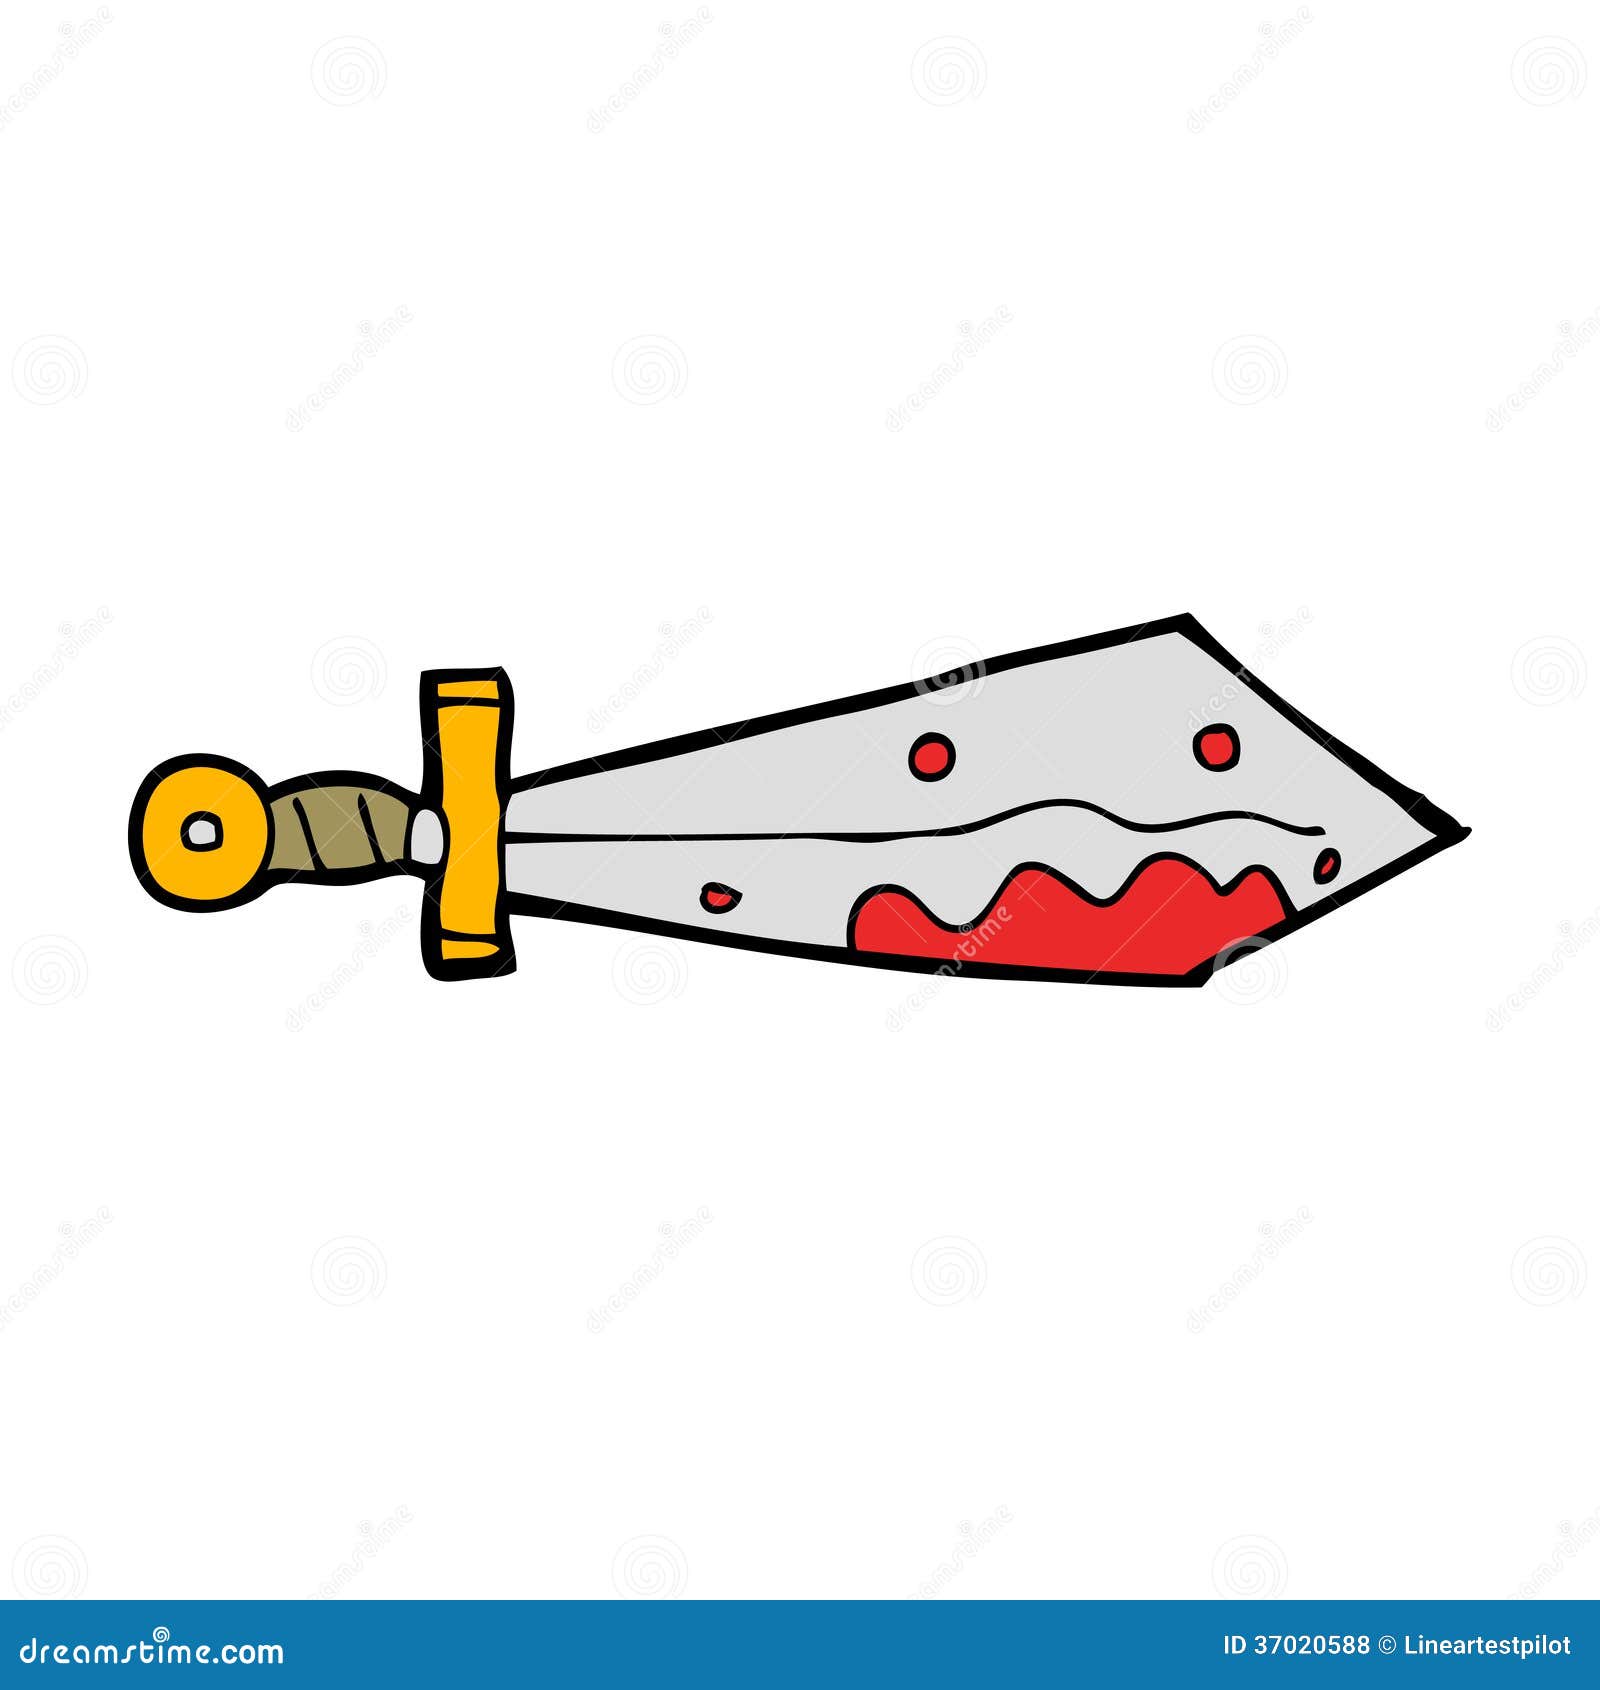 clipart bloody hand - photo #35